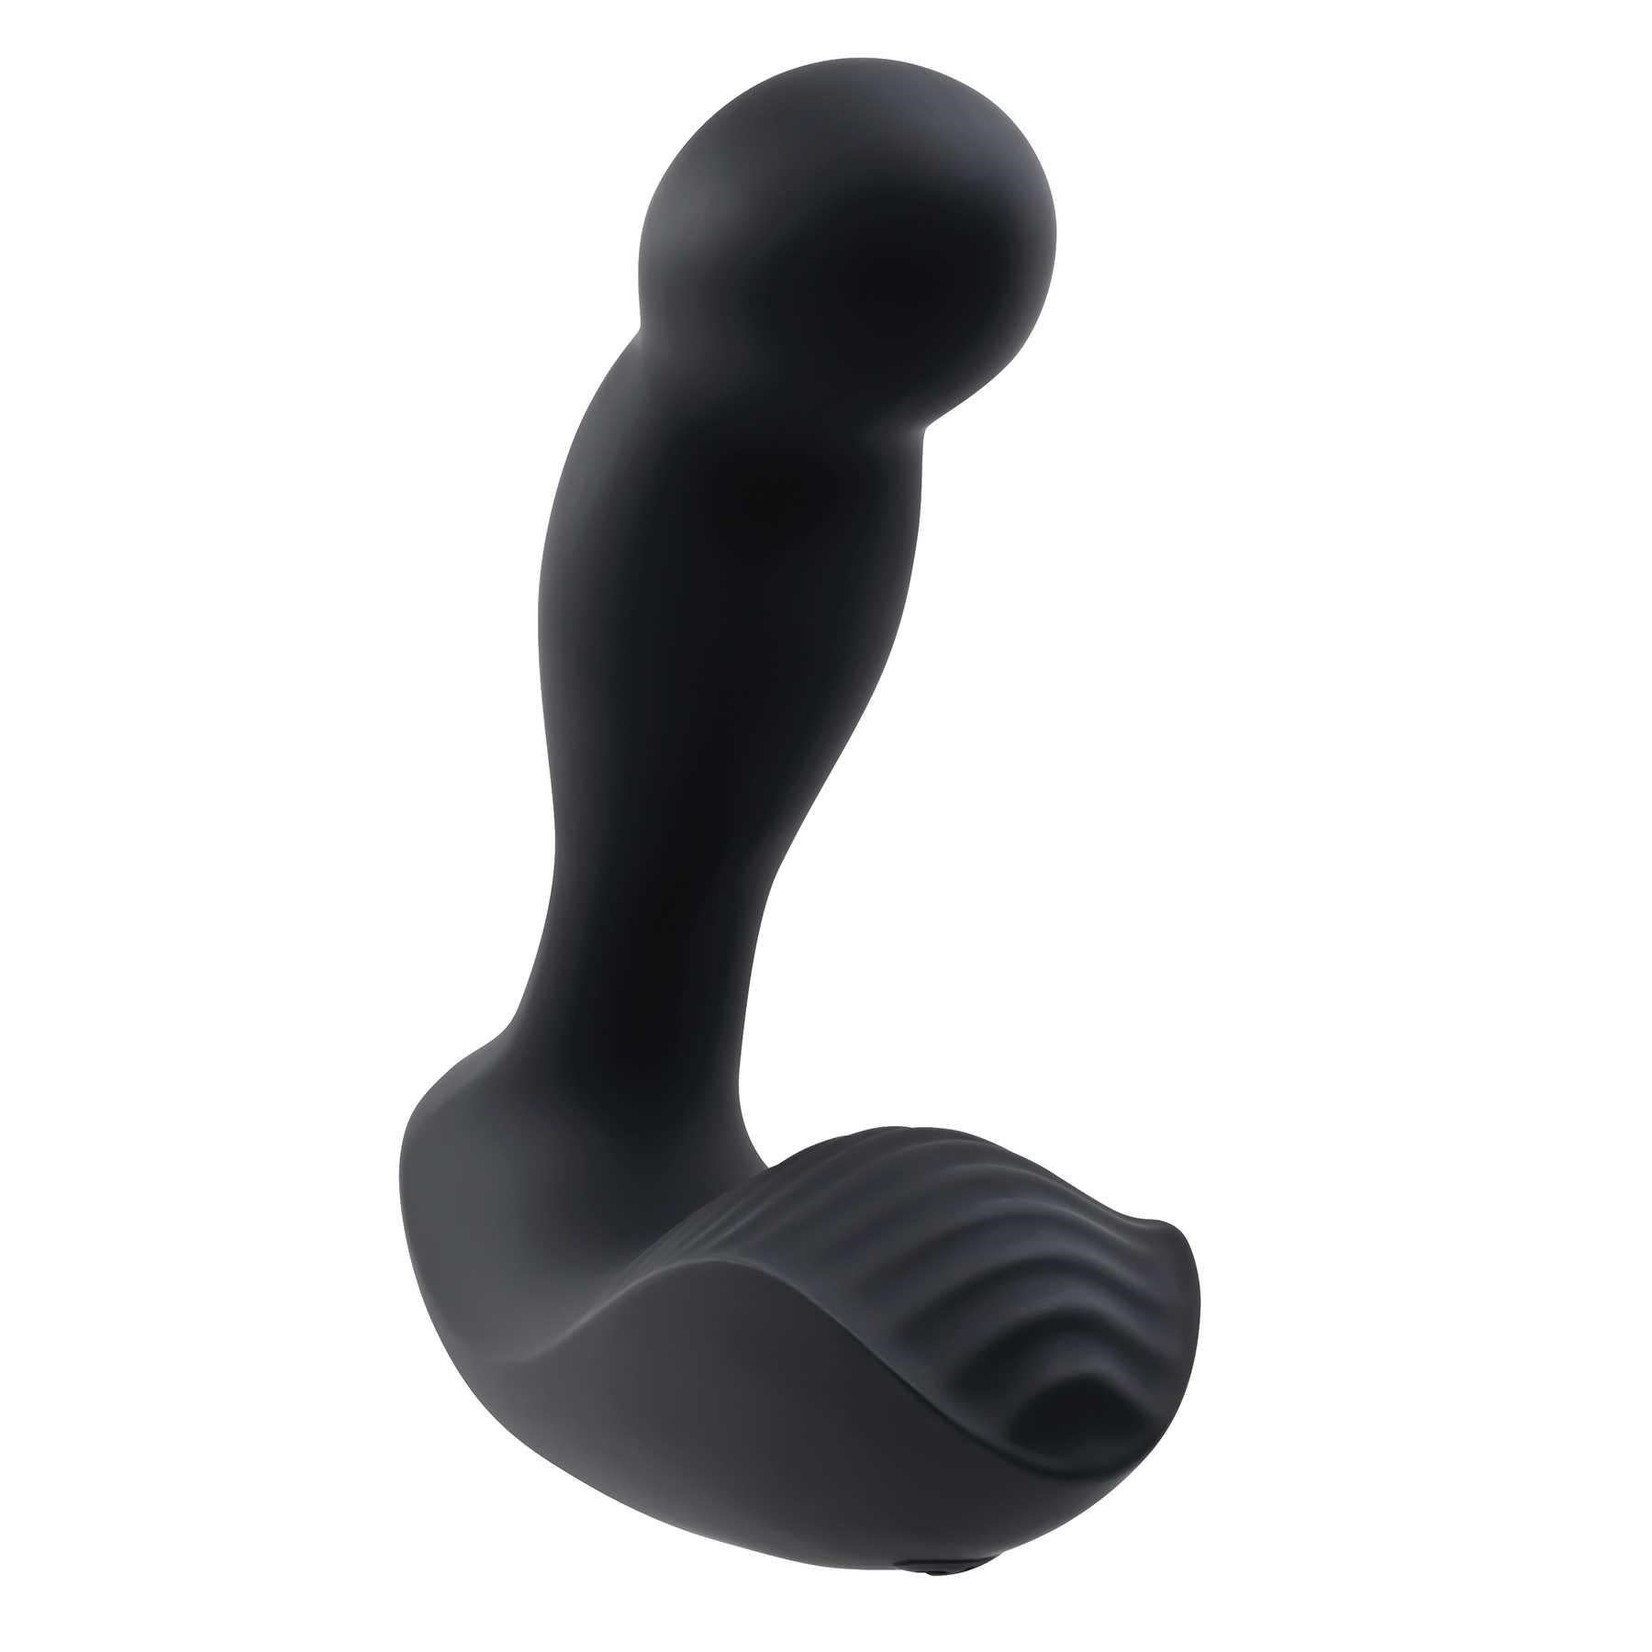 ADAM & EVE ADAM'S COME HITHER PROSTATE MASSAGER